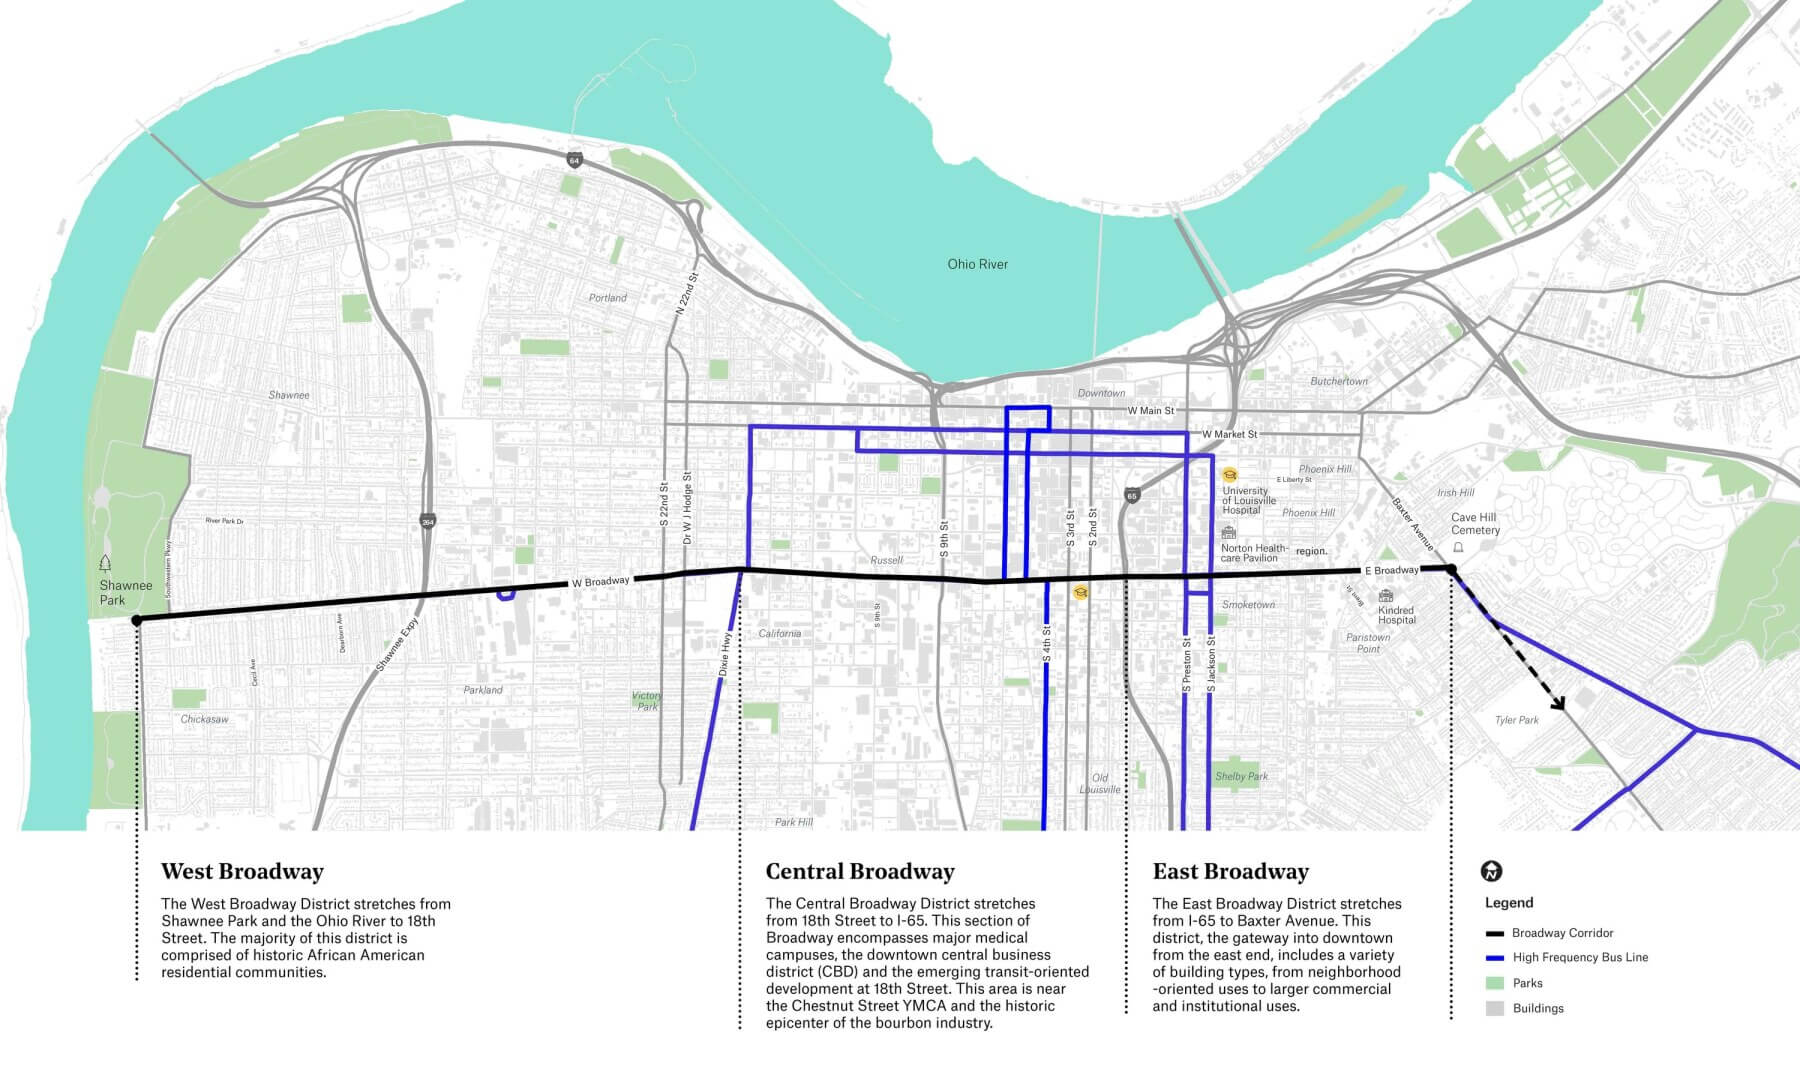 a map of Louisville identifying the project sites and current conditions